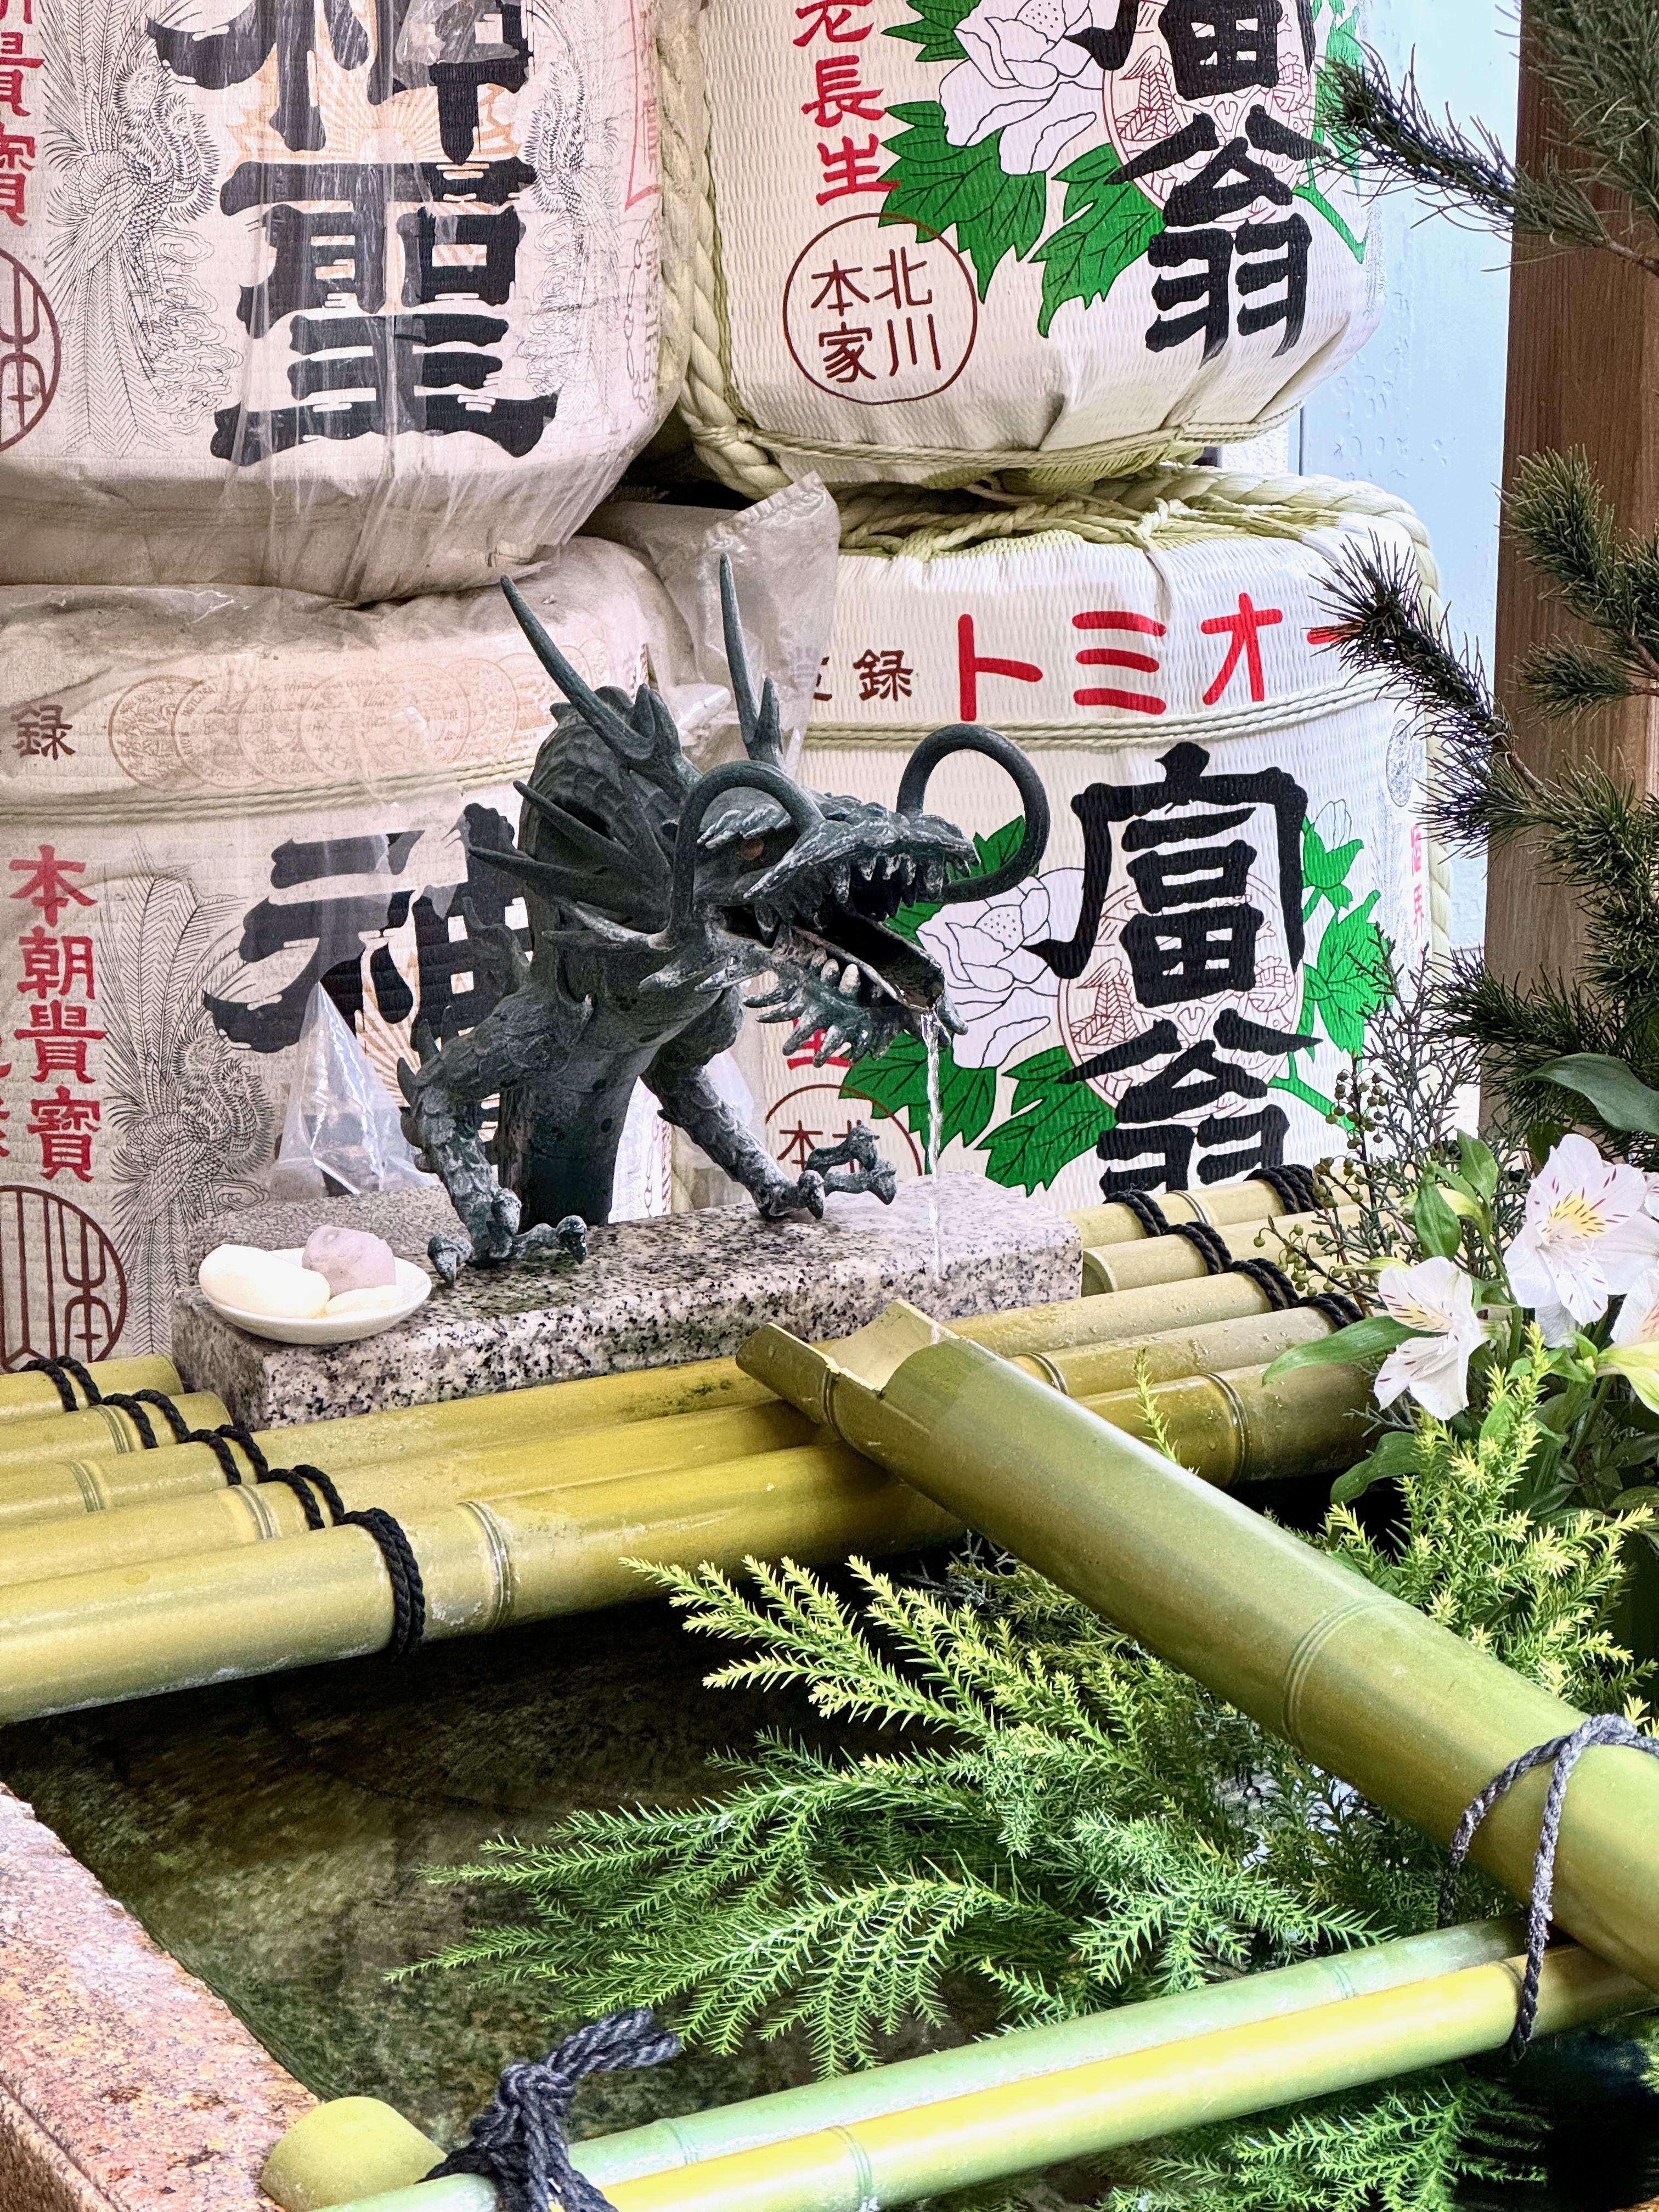 A dragon water fountain in a temple at Kyoto